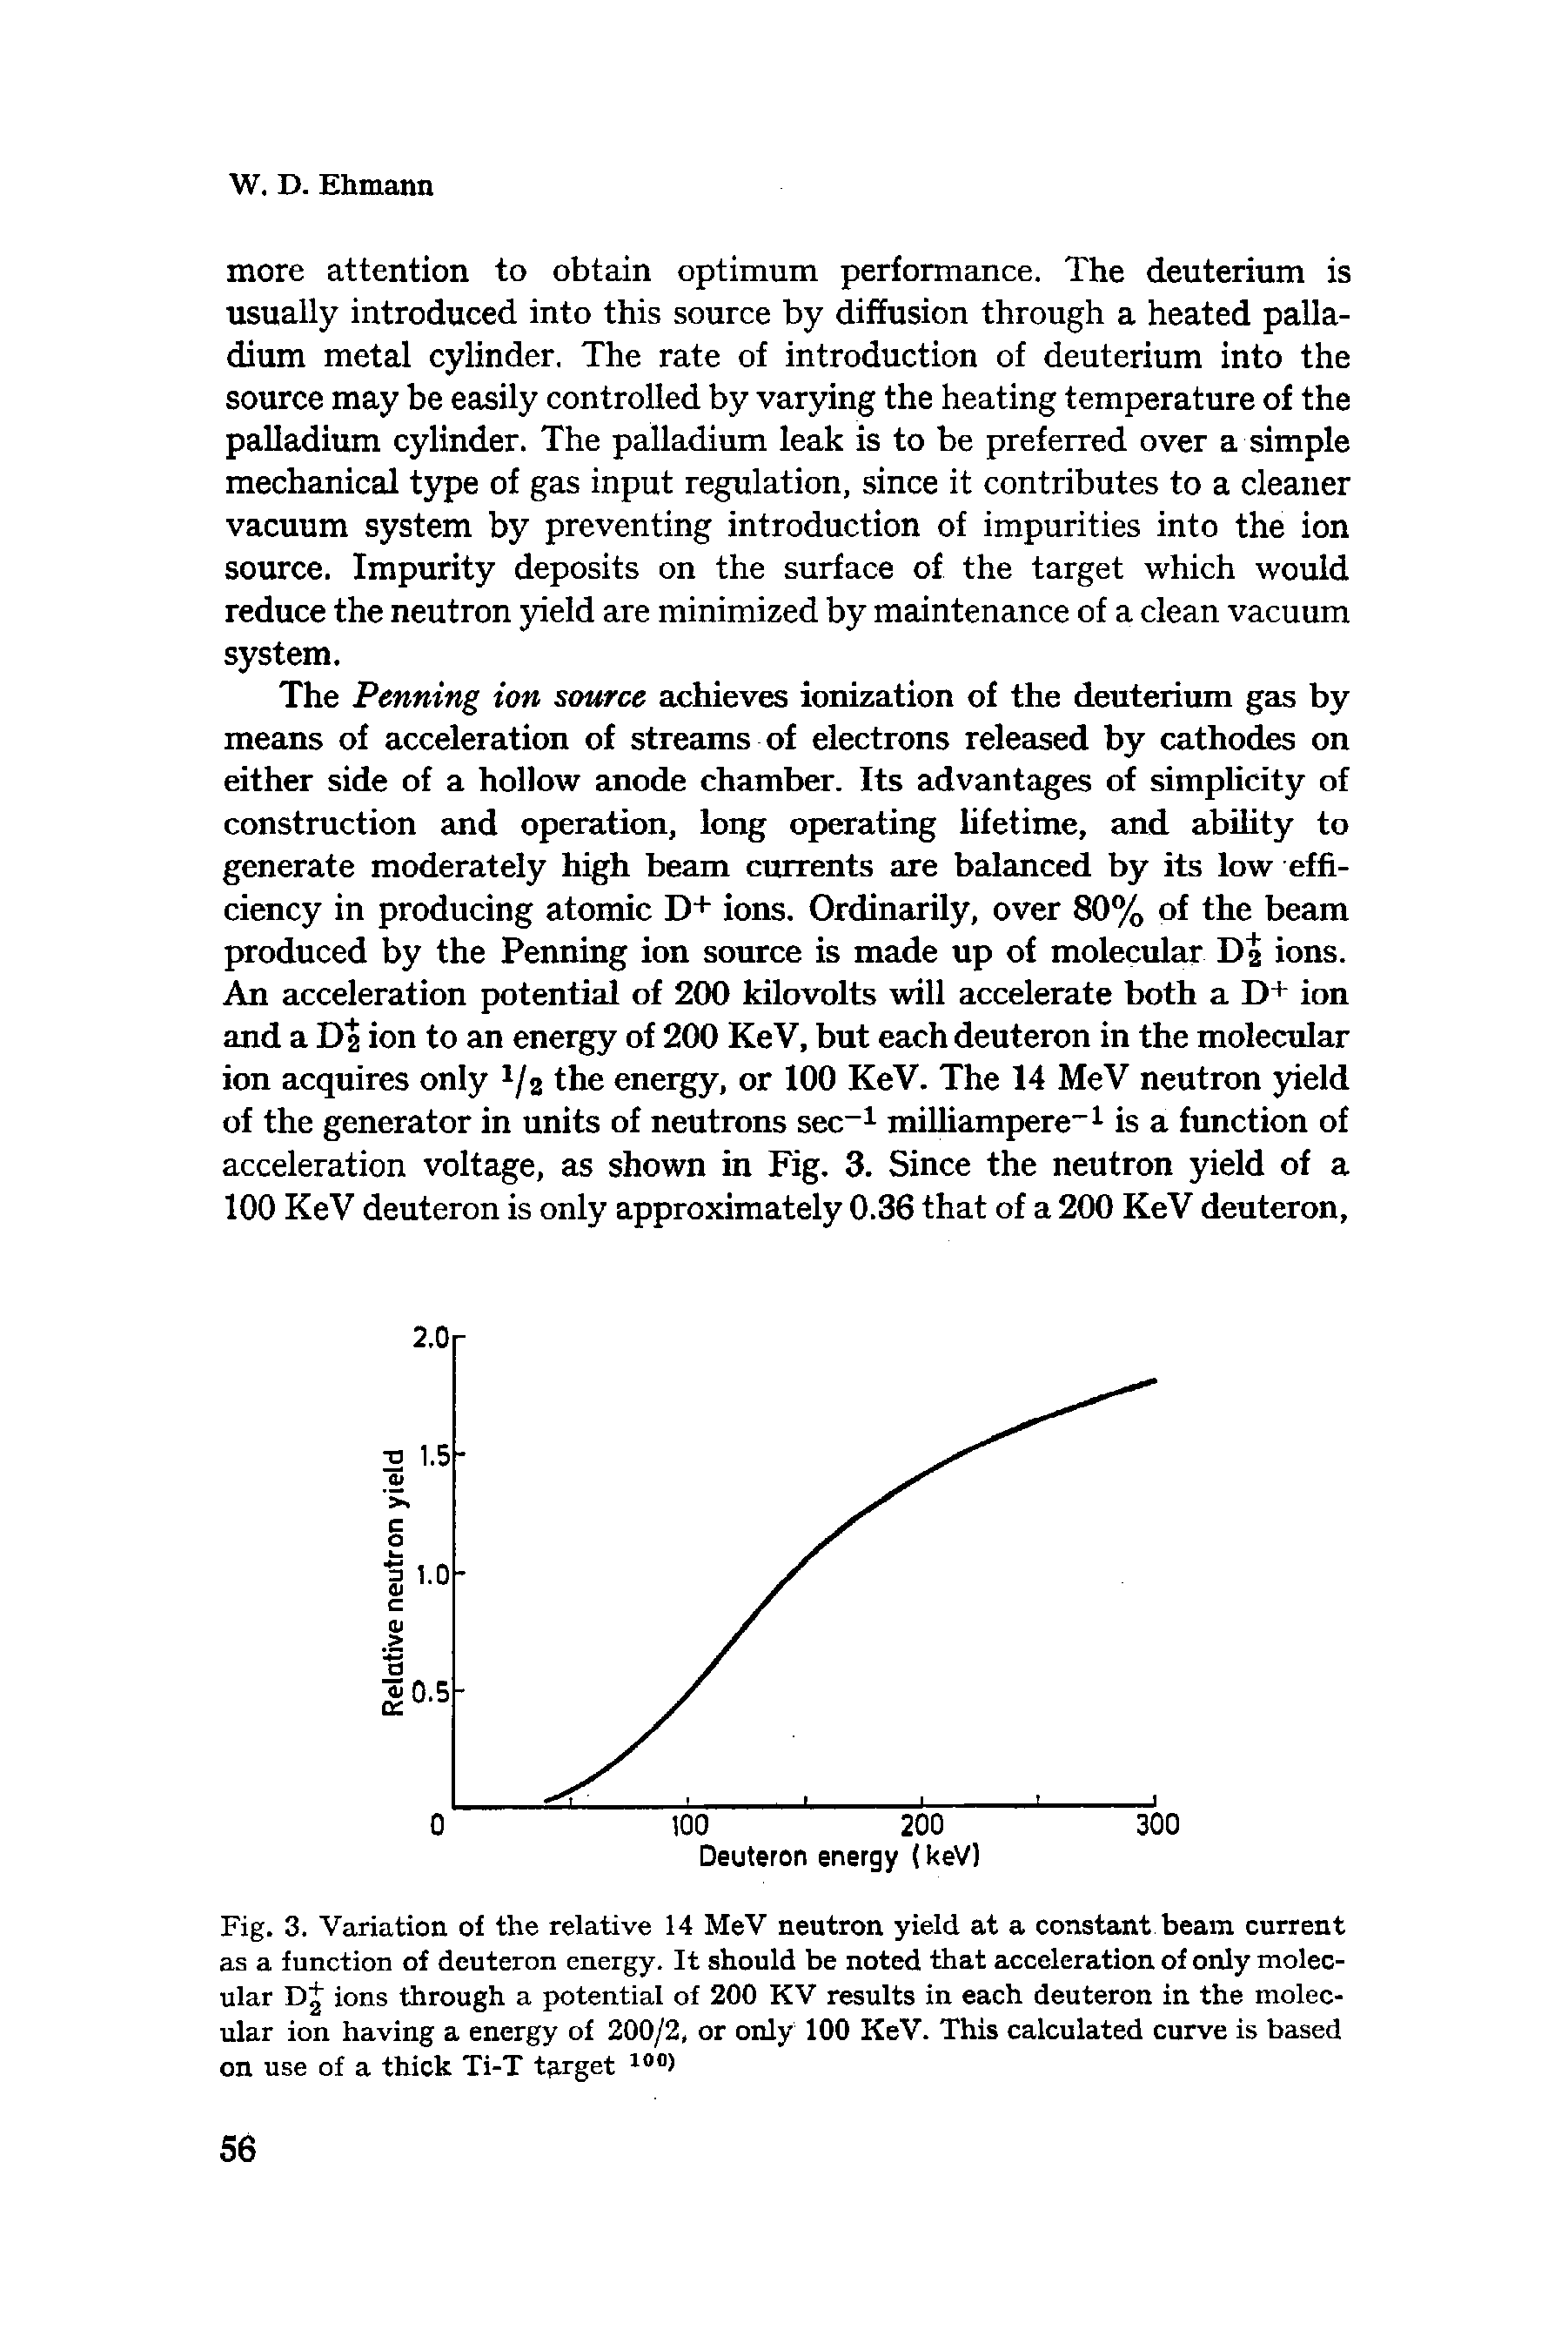 Fig. 3. Variation of the relative 14 MeV neutron yield at a constant beam current as a function of deuteron energy. It should be noted that acceleration of only molecular D j ions through a potential of 200 KV results in each deuteron in the molecular ion having a energy of 200/2, or only 100 KeV. This calculated curve is based on use of a thick Ti-T target 100>...